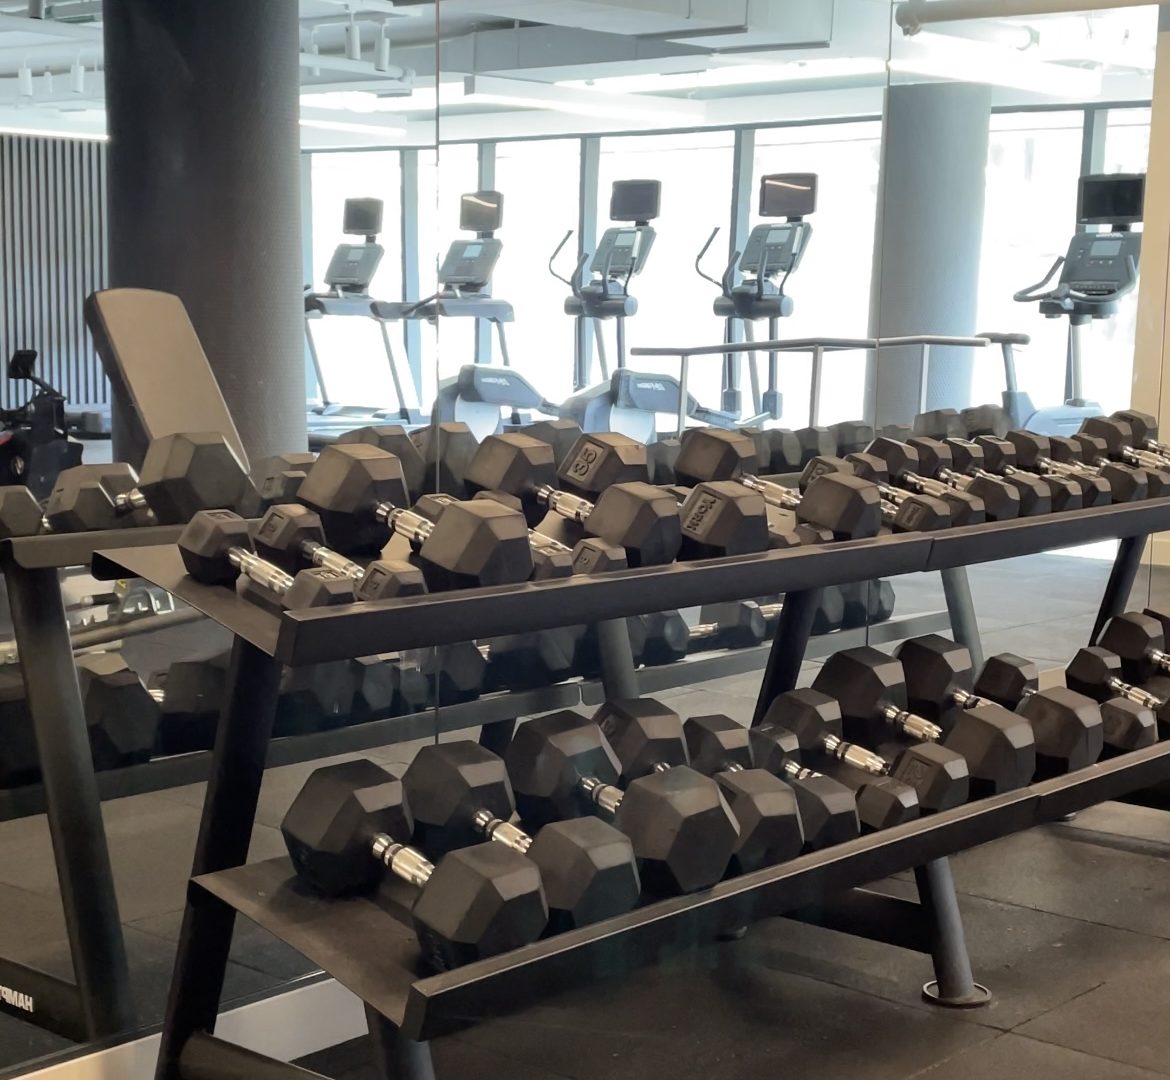 Picture of weights section at a gym